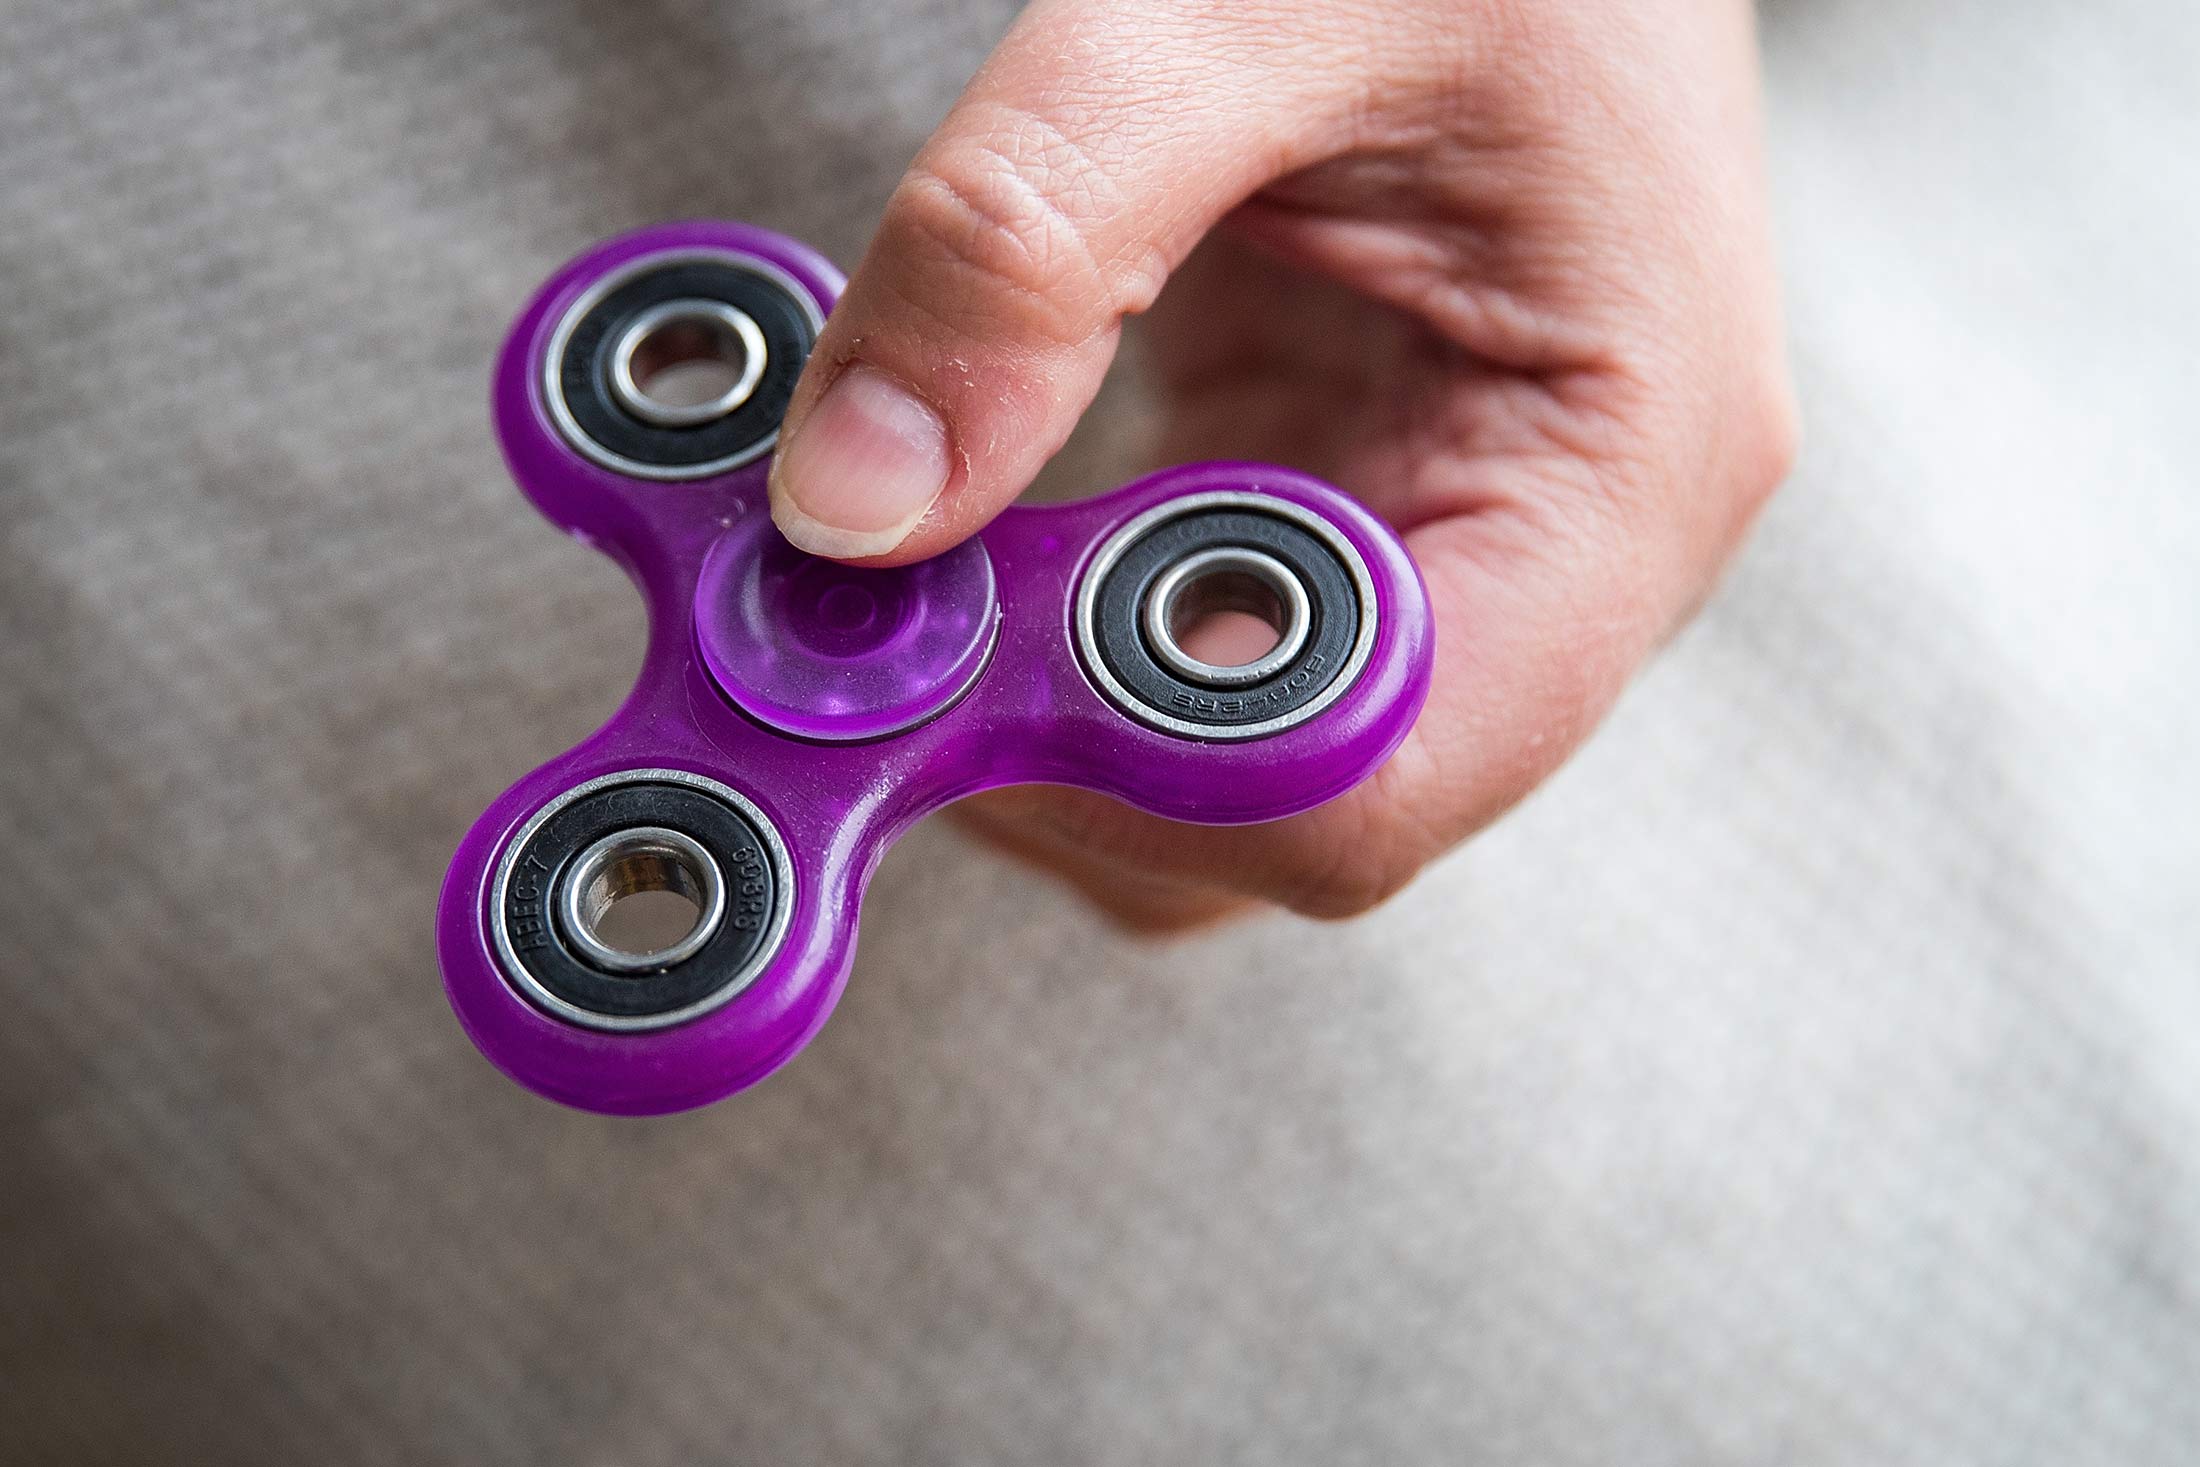 skam springvand Udover How the Fidget Spinner Origin Story Spun Out of Control - Bloomberg